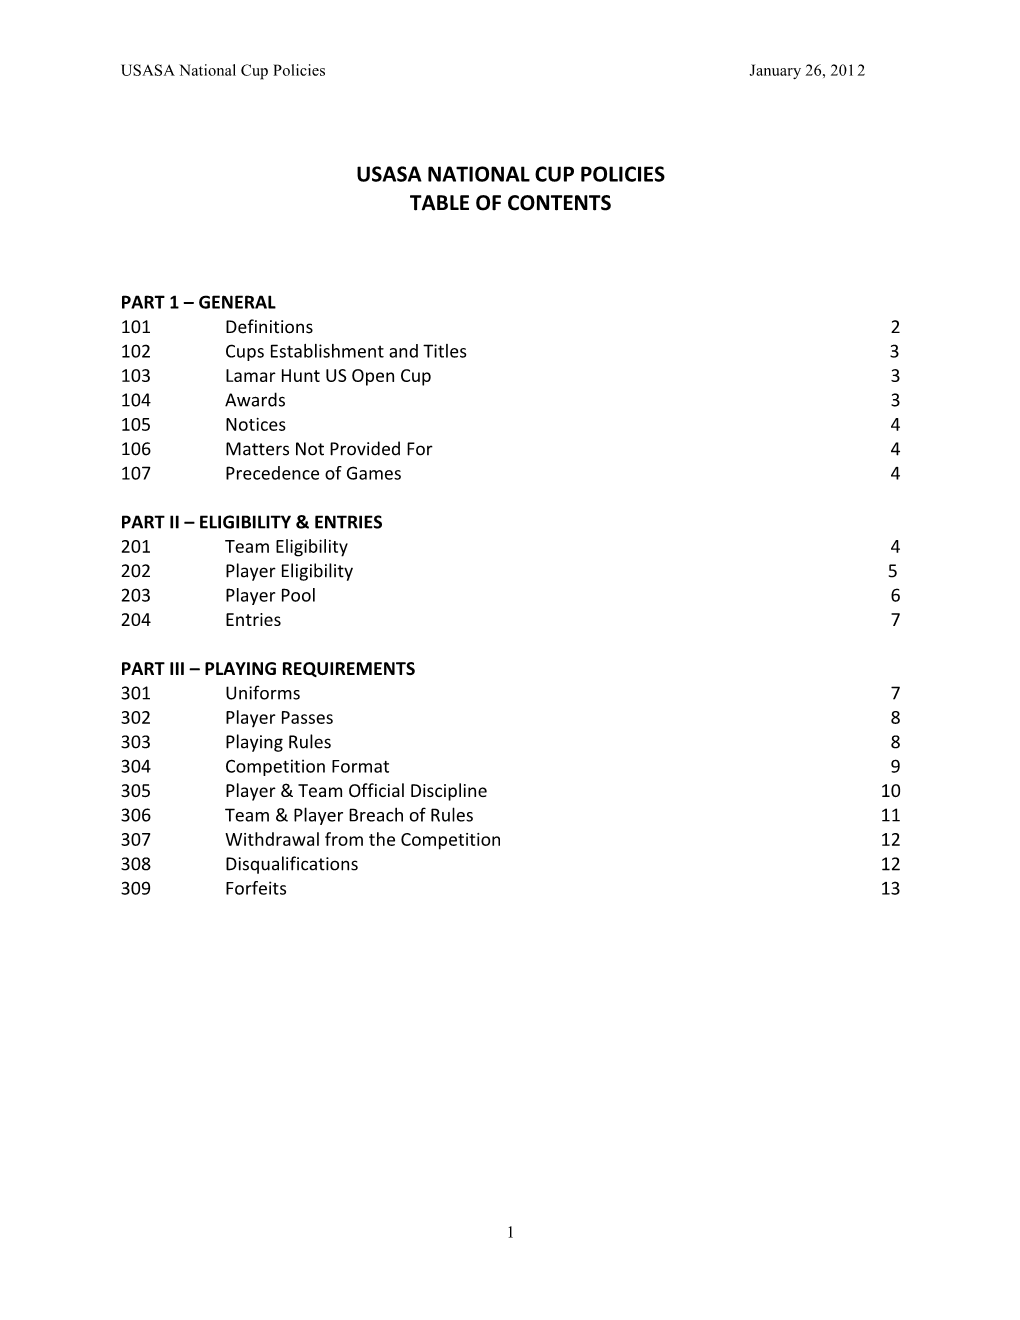 Usasa National Cup Policies Table of Contents